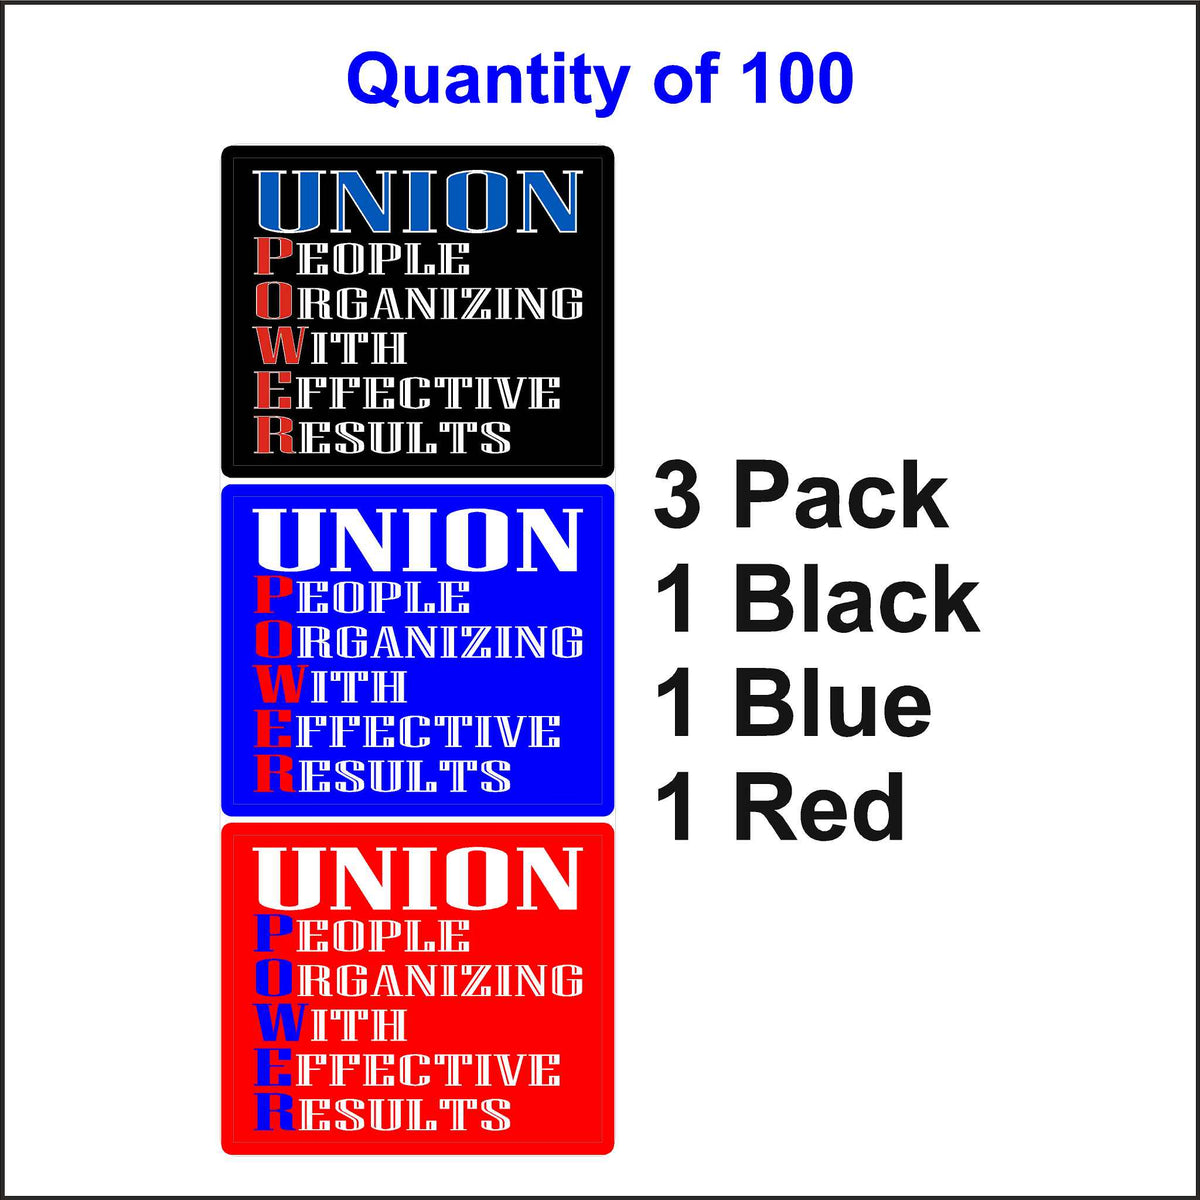 Union Power Stickers. One Black, One Blue, and One Red. 100 Quantity.